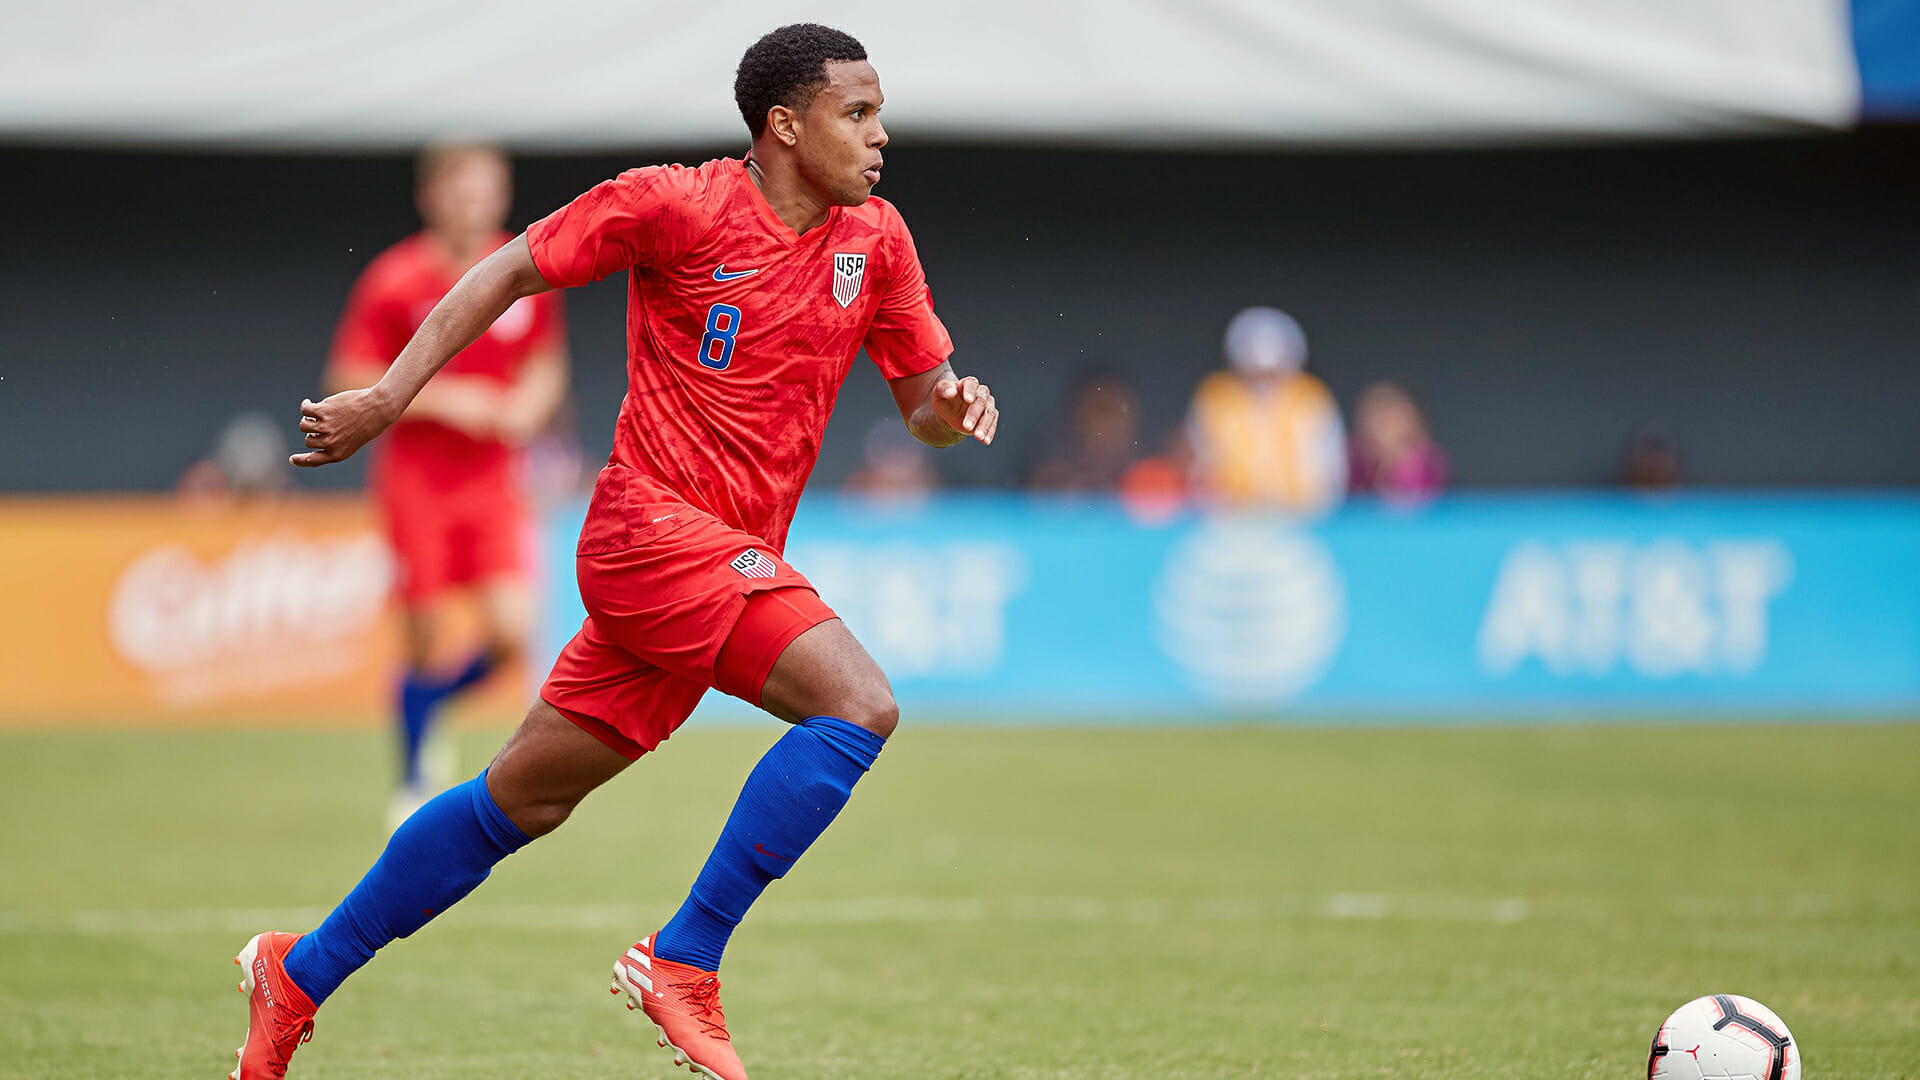 CINCINNATI OH JUNE 09 Weston Mckennie 8 of the United States dribbles the ball in action durin